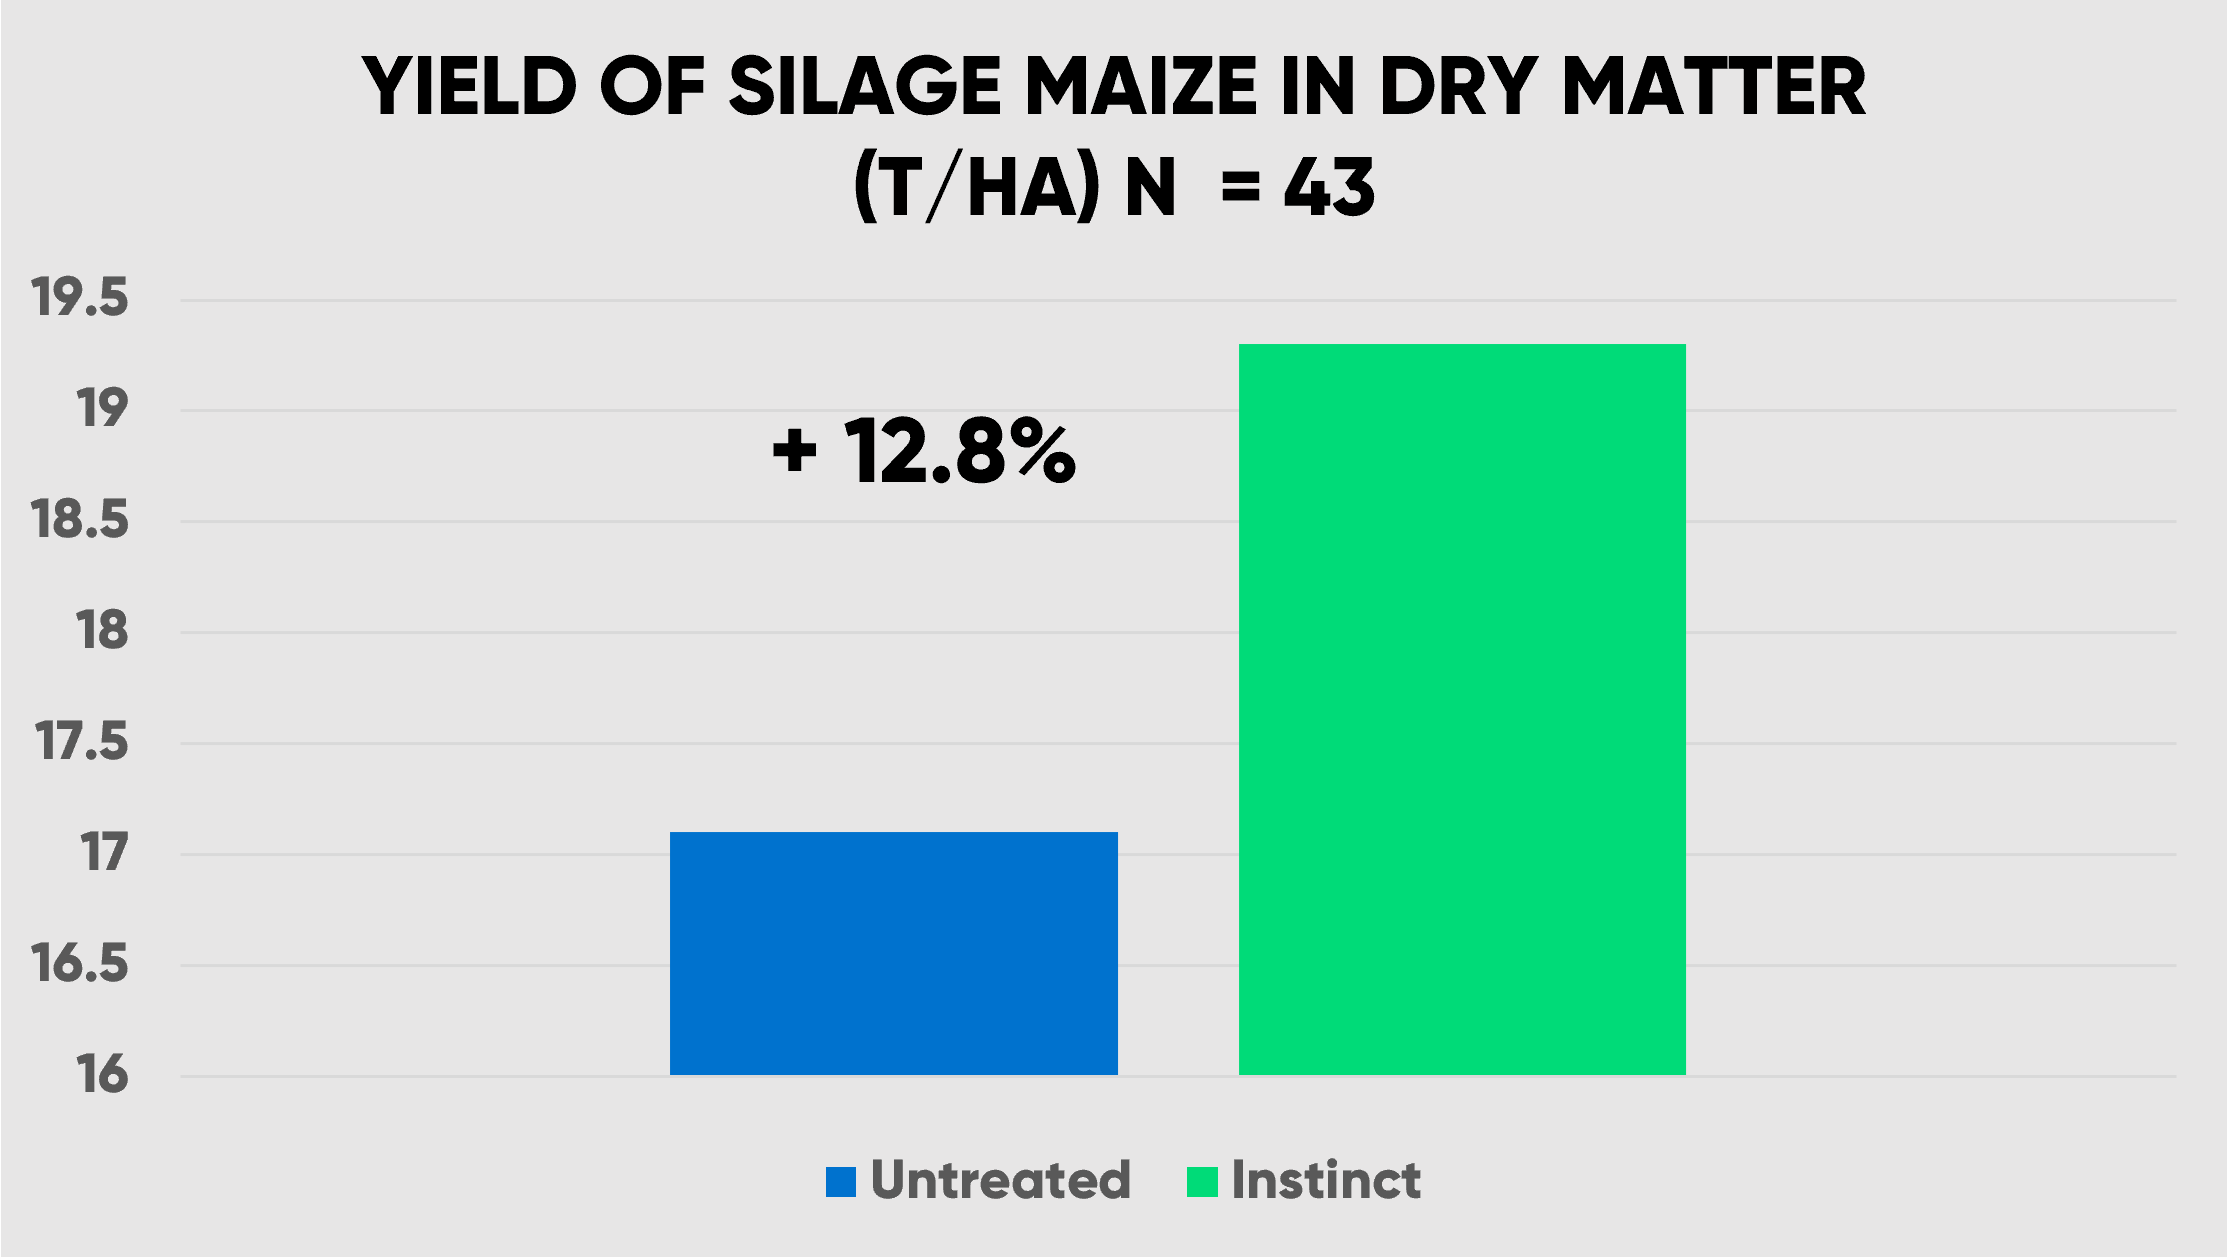 Yield of silage maize in dry matter